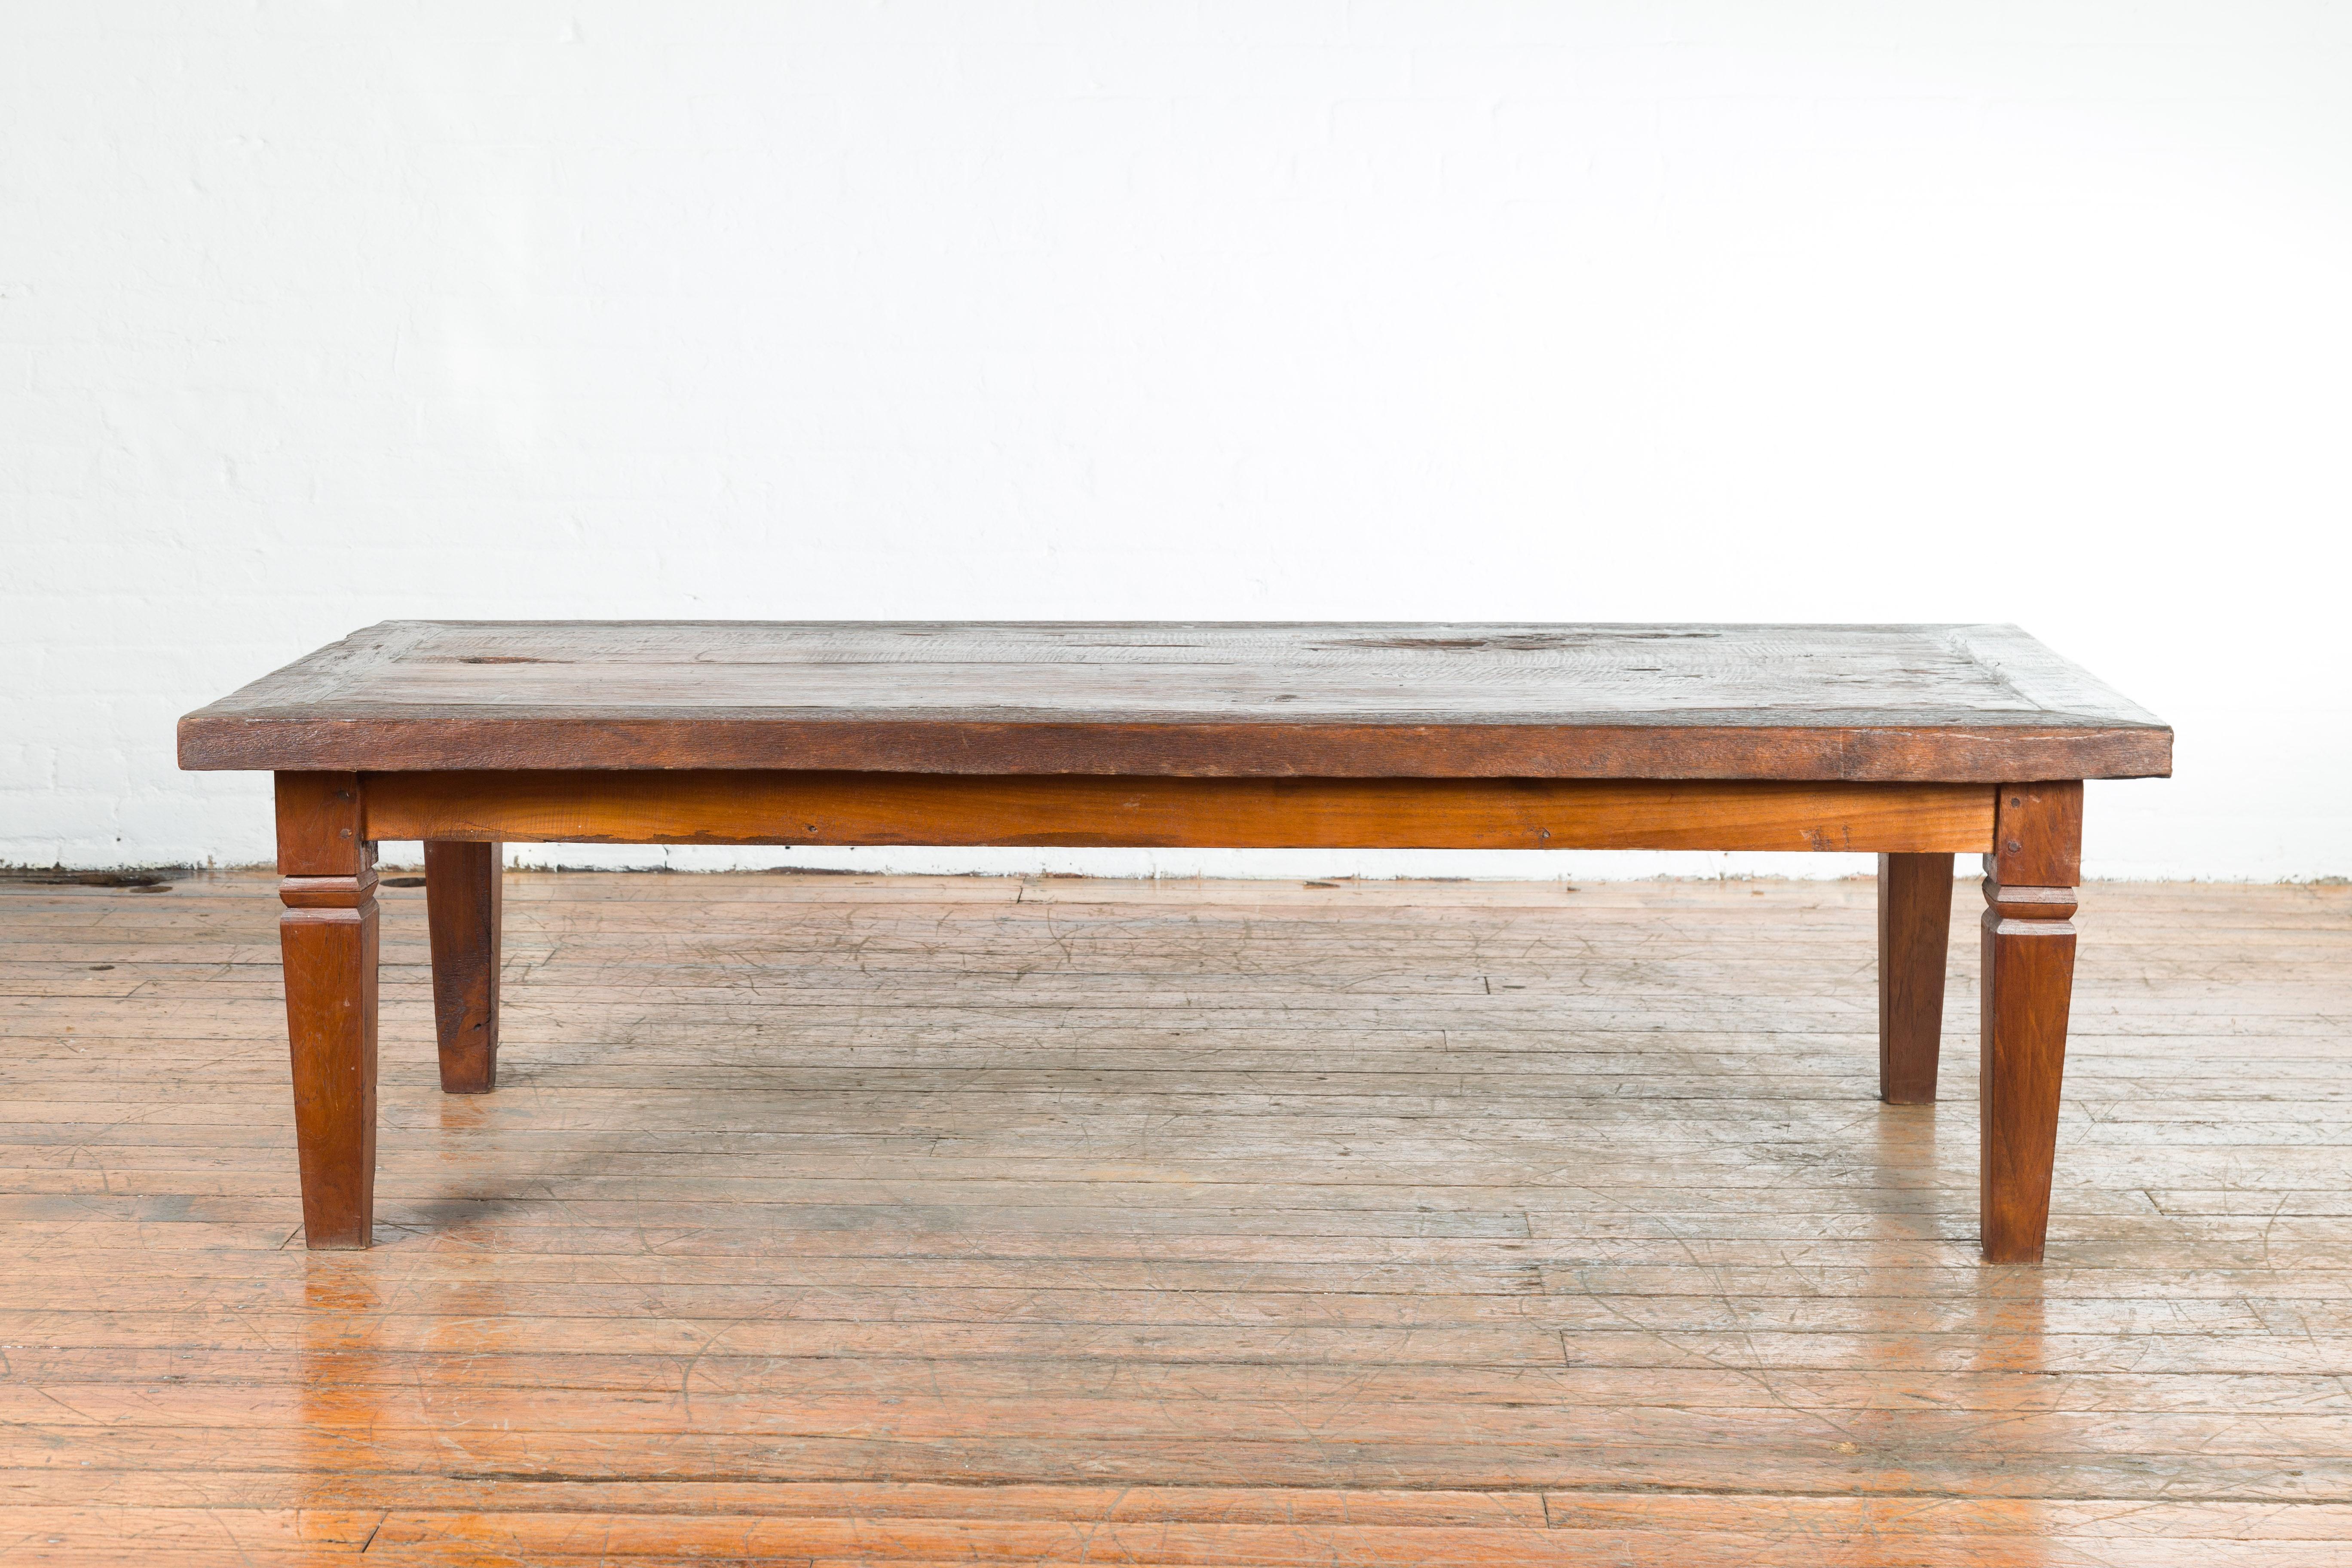 A rustic Indonesian wooden coffee table from the 19th century, with tapered legs. Created in Indonesia during the 19th century, this coffee table draws our attention with its rustic planked top boasting a nicely weathered appearance, sitting above